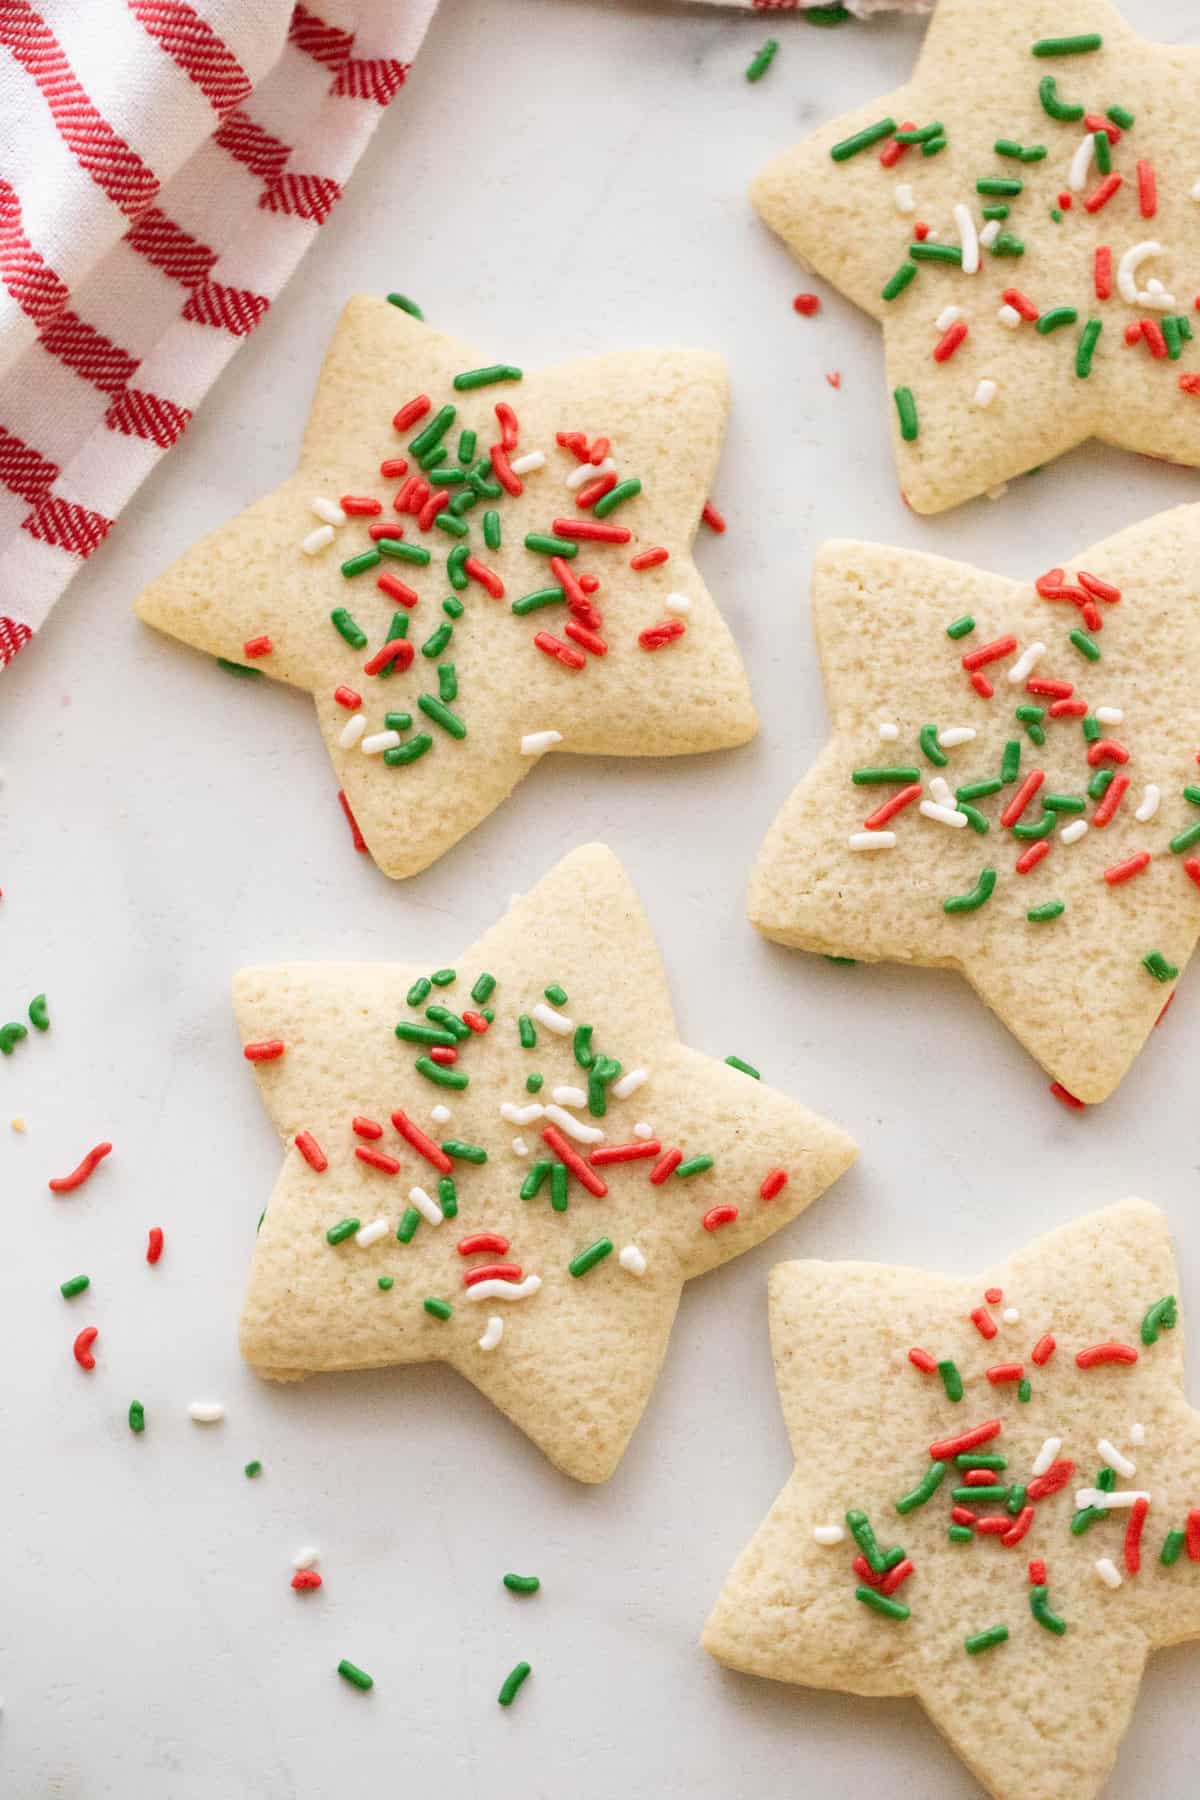 Star shaped dairy free sugar cookies on a white counter near a red and white striped kitchen towel.